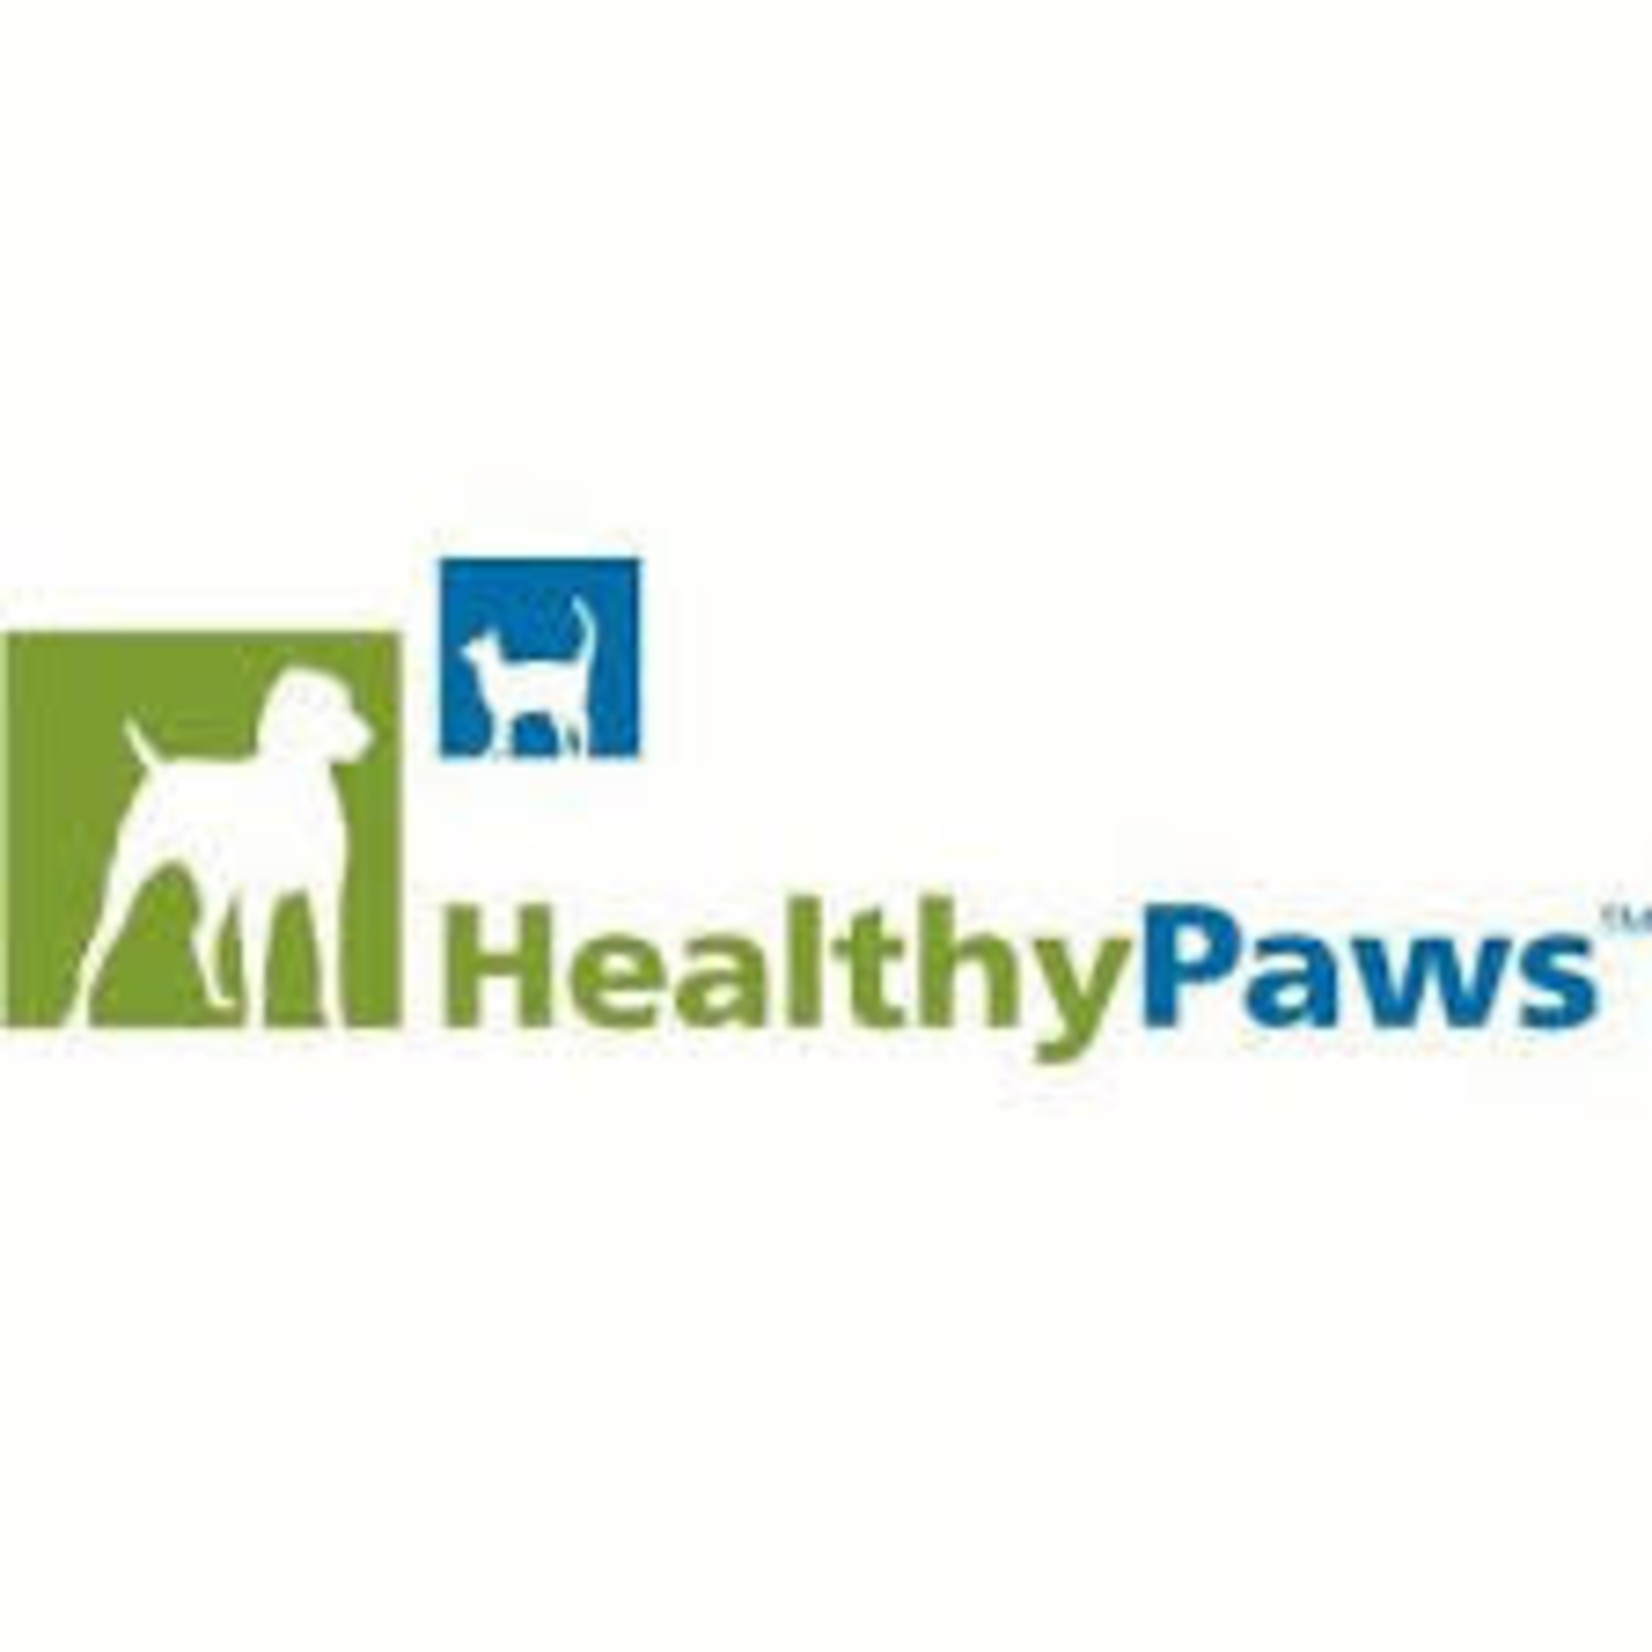 Healthy Paws Healthy Paws - Complete Raw Dog Dinner